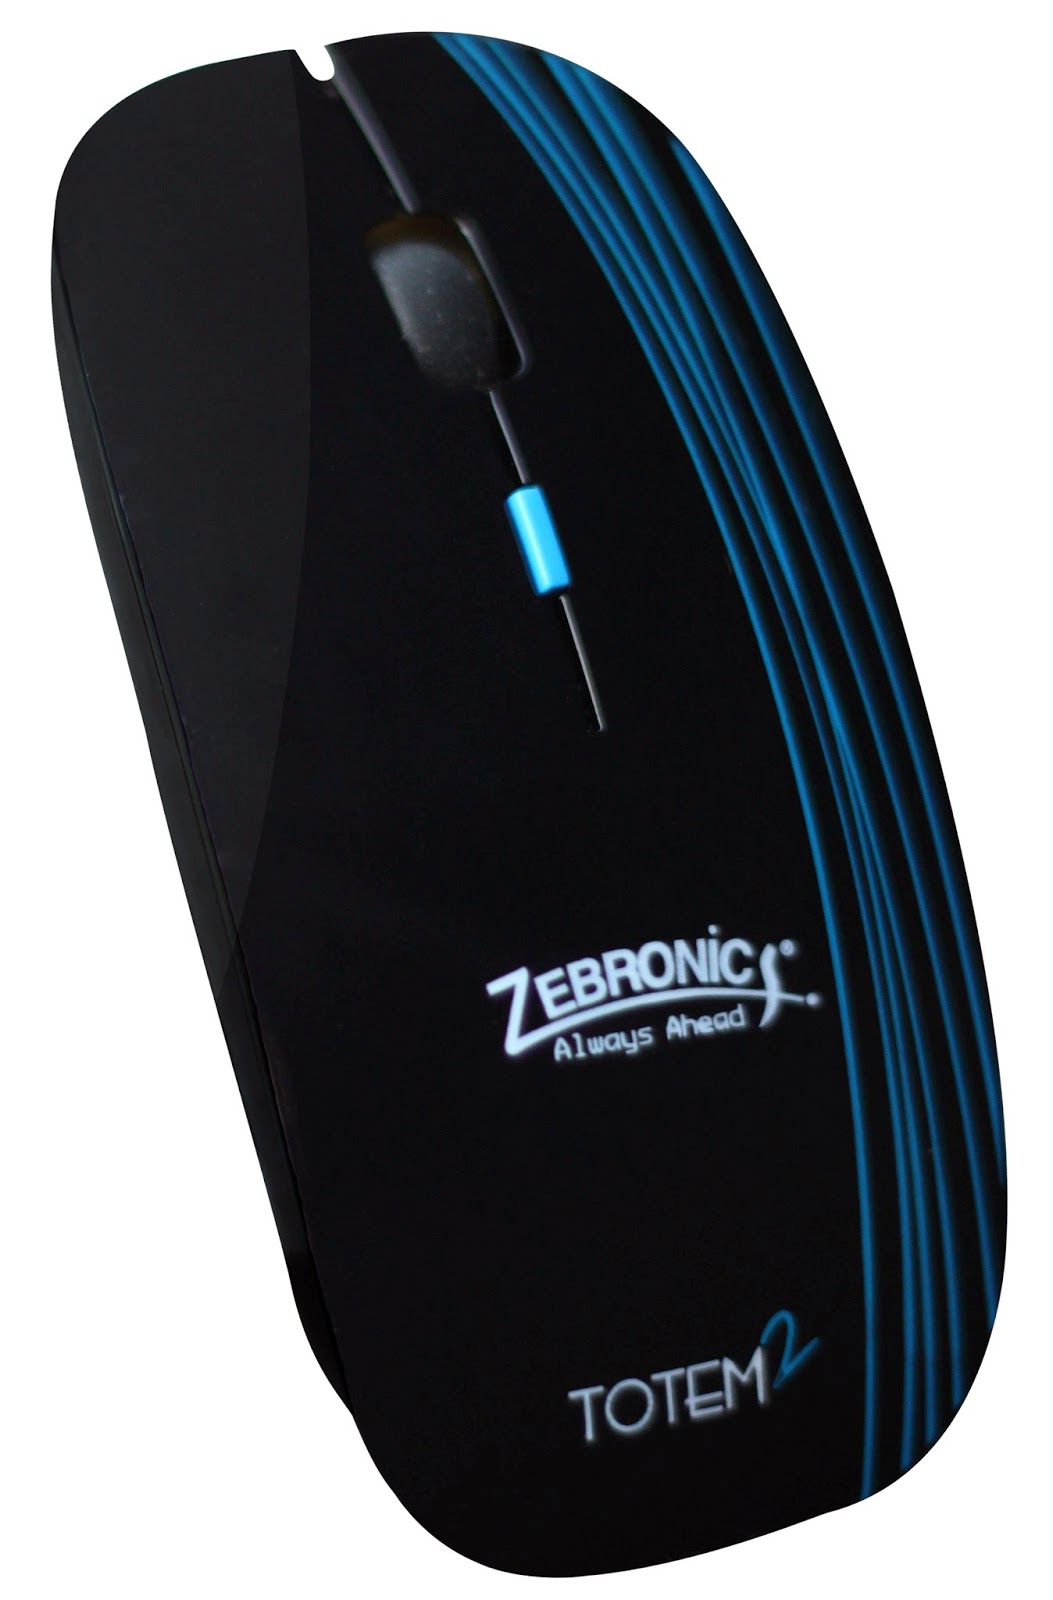 Zebronics unveils The Totem 2 Wireless Optical Mouse